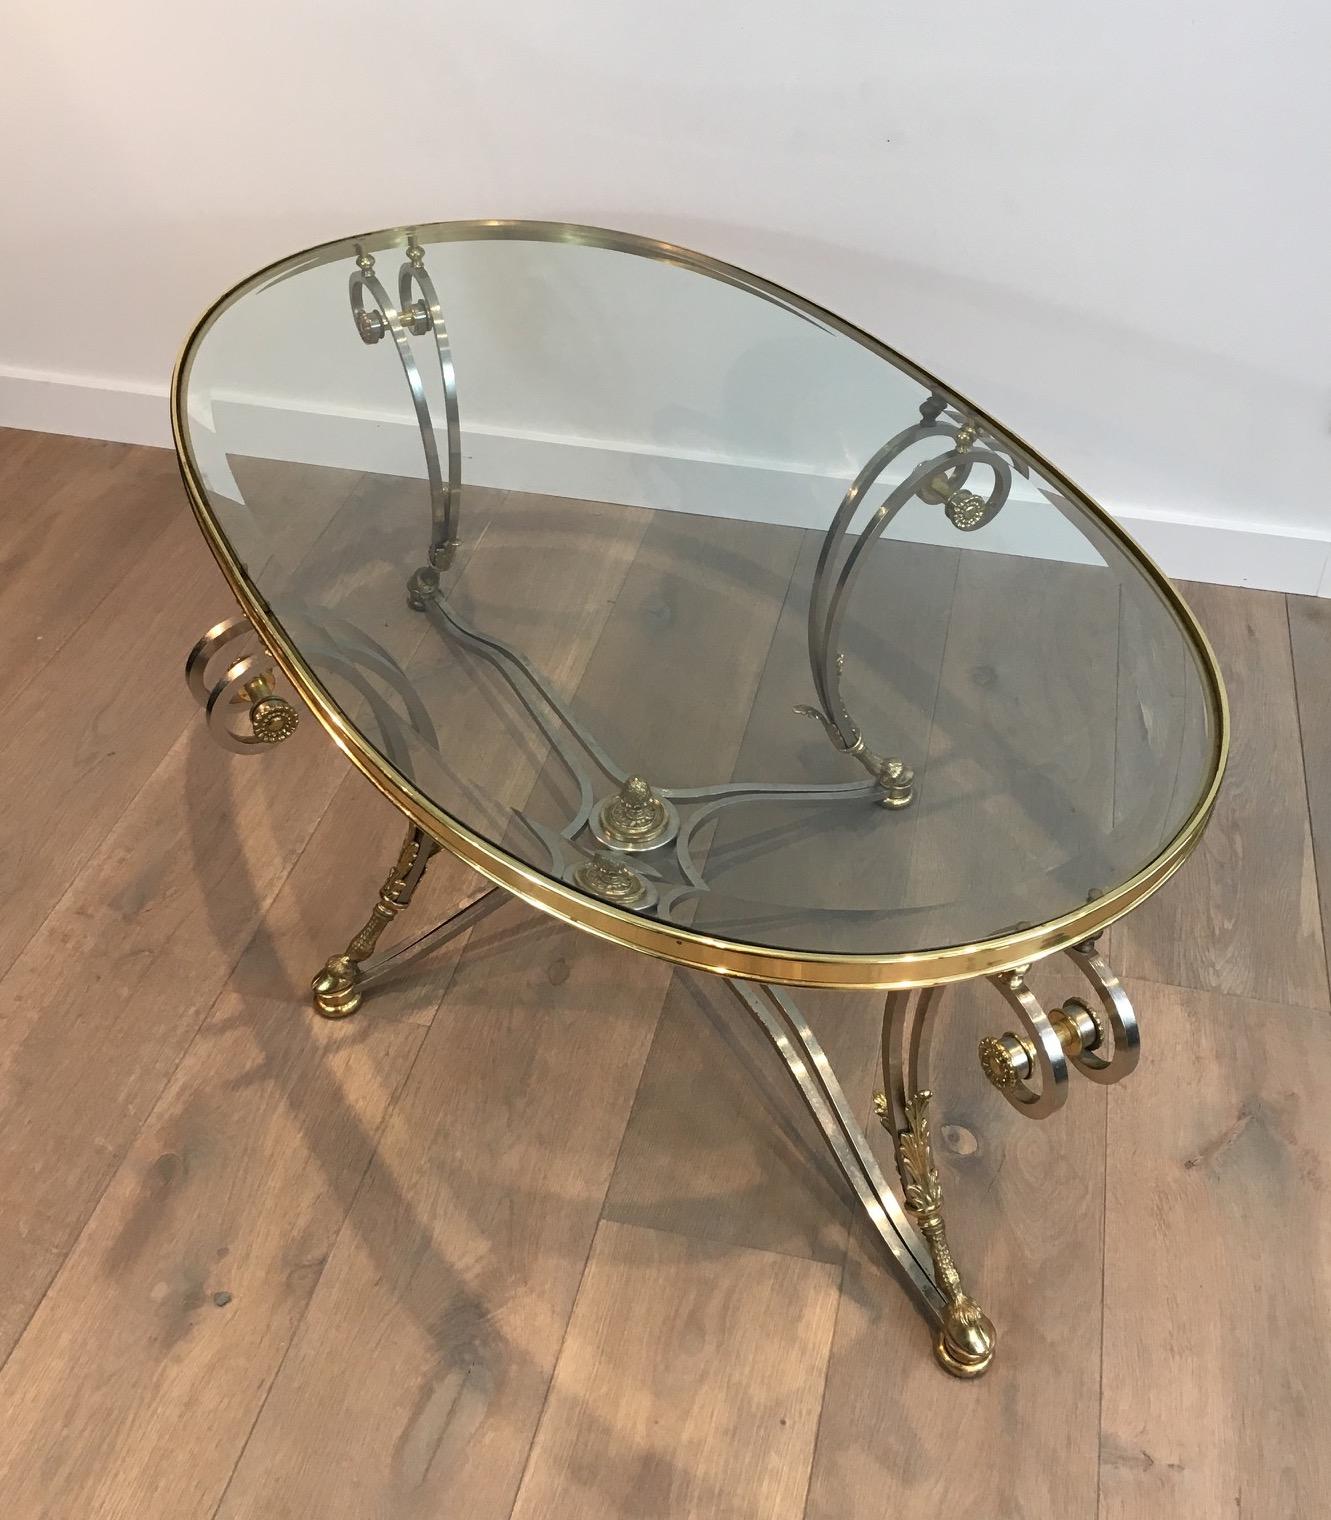 This beautiful neoclassical style oval coffee table is made of brushed steel and brass. This is a very elegant coffee table, which quality is really good. The oval glass top is beveled. 